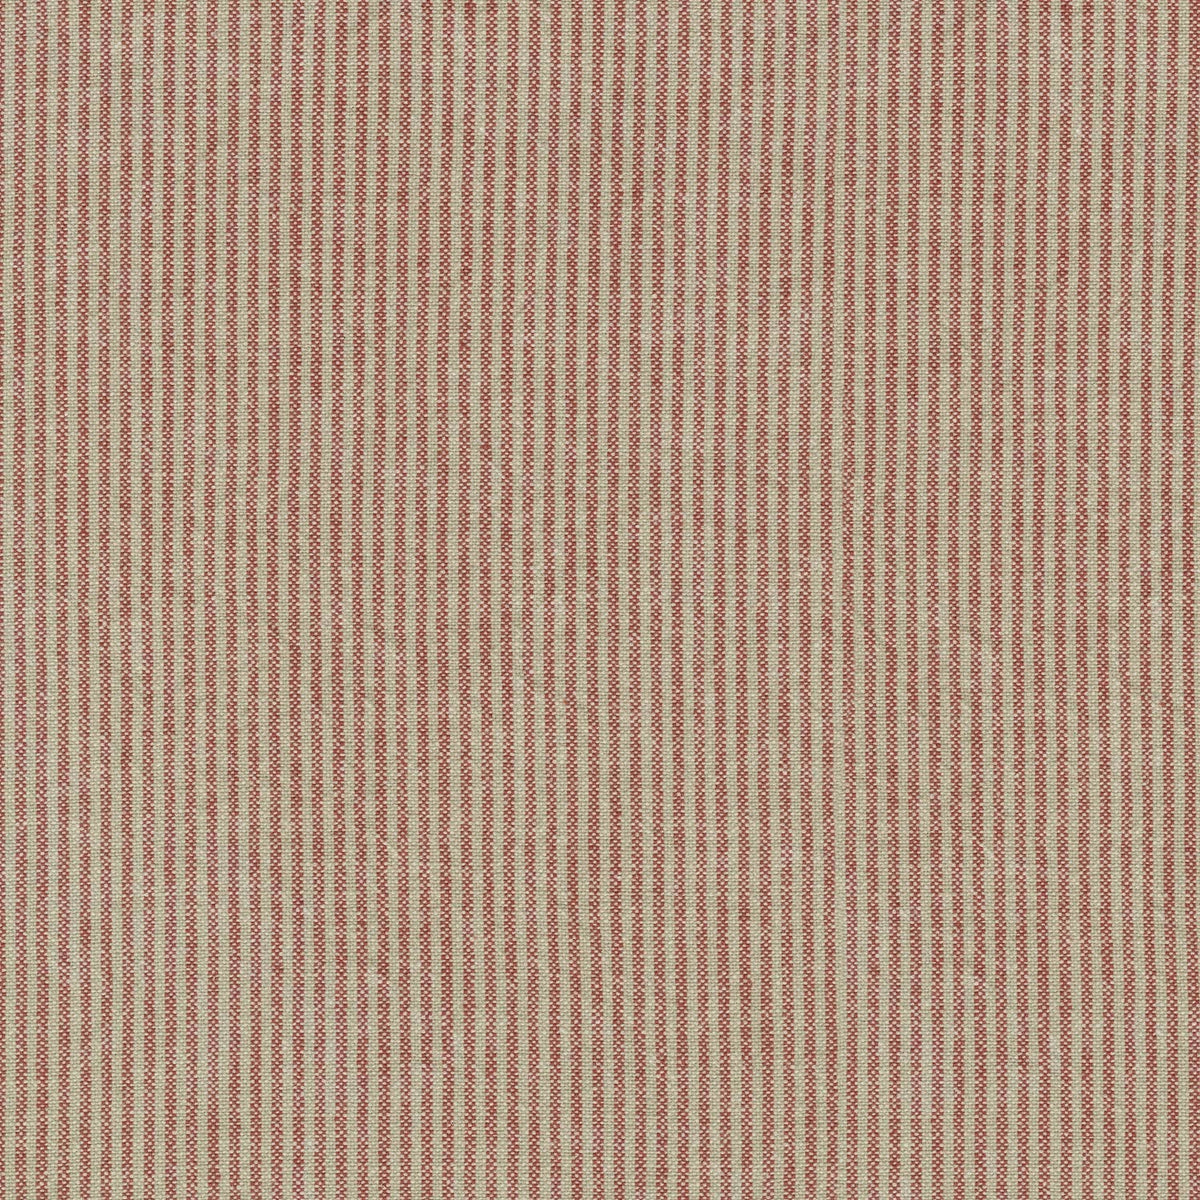 P/K Lifestyles Cullen Ticking - Bayberry 410714 Fabric Swatch